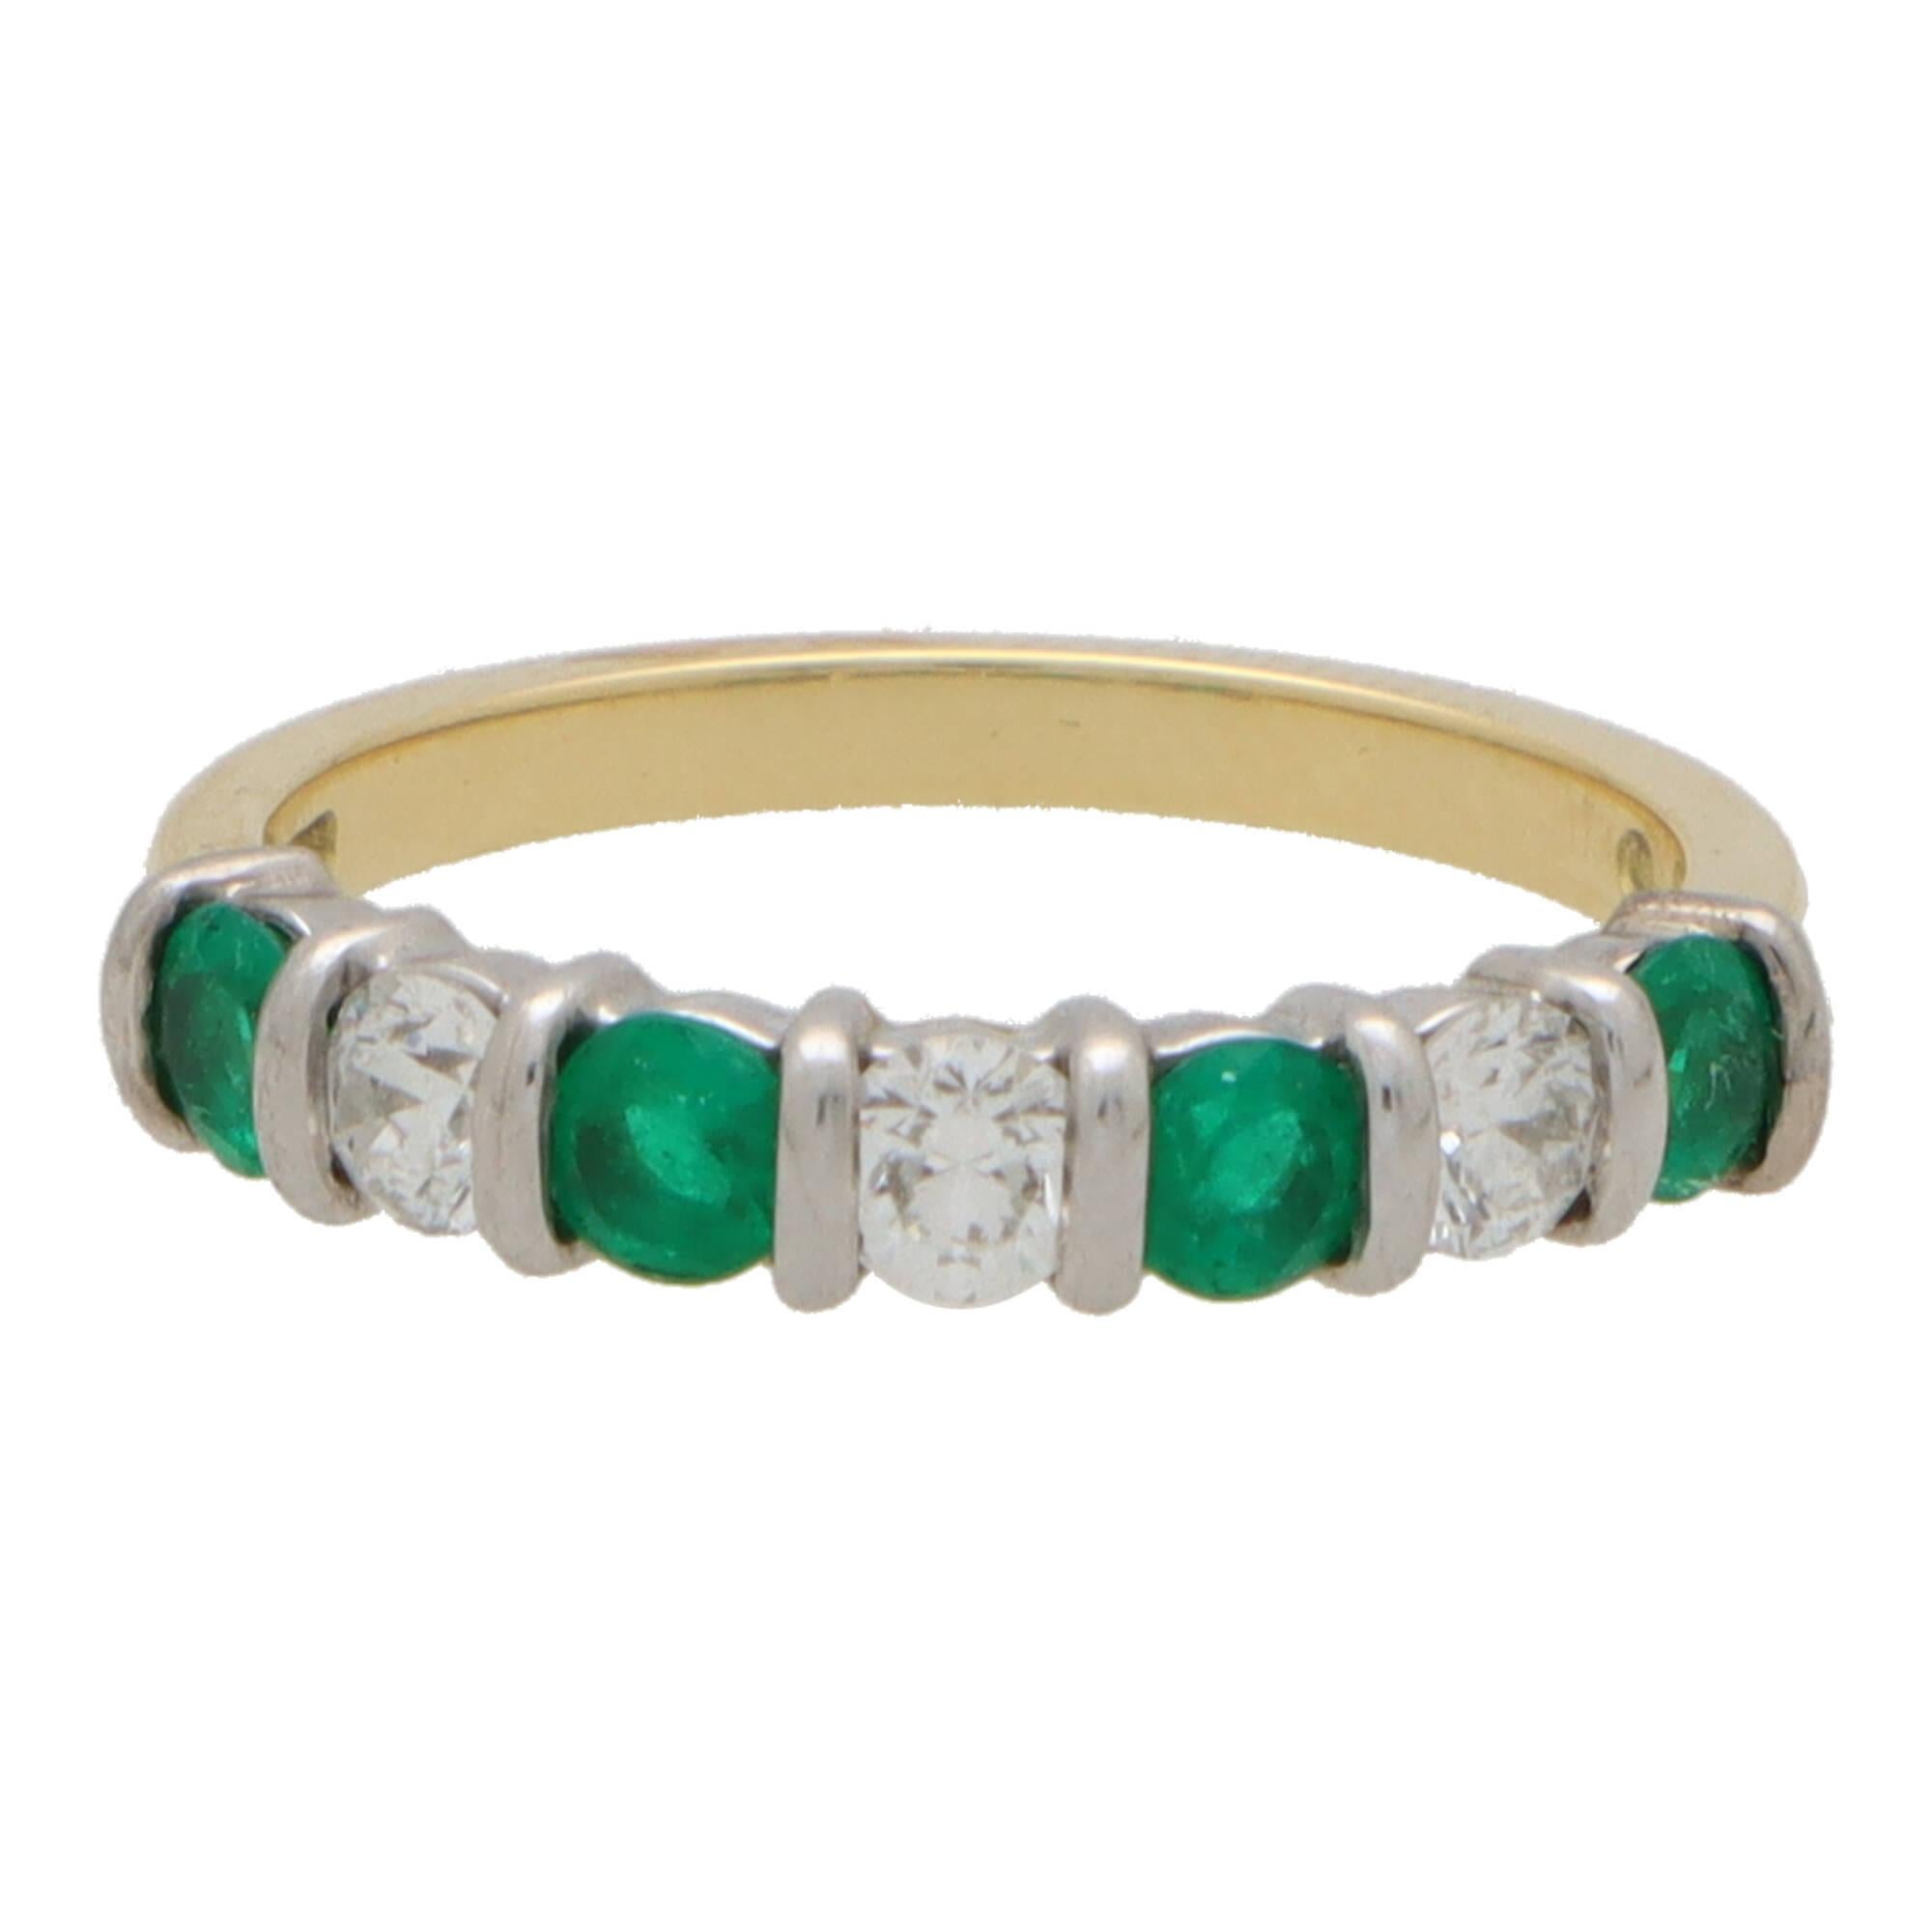  A lovely diamond and emerald half eternity ring set in 18k yellow and white gold. 

The ring is composed of 7 round cut stones altogether, 4 of which being emeralds and 3 diamonds. All the stones are perfectly set in white gold within a 2mm yellow